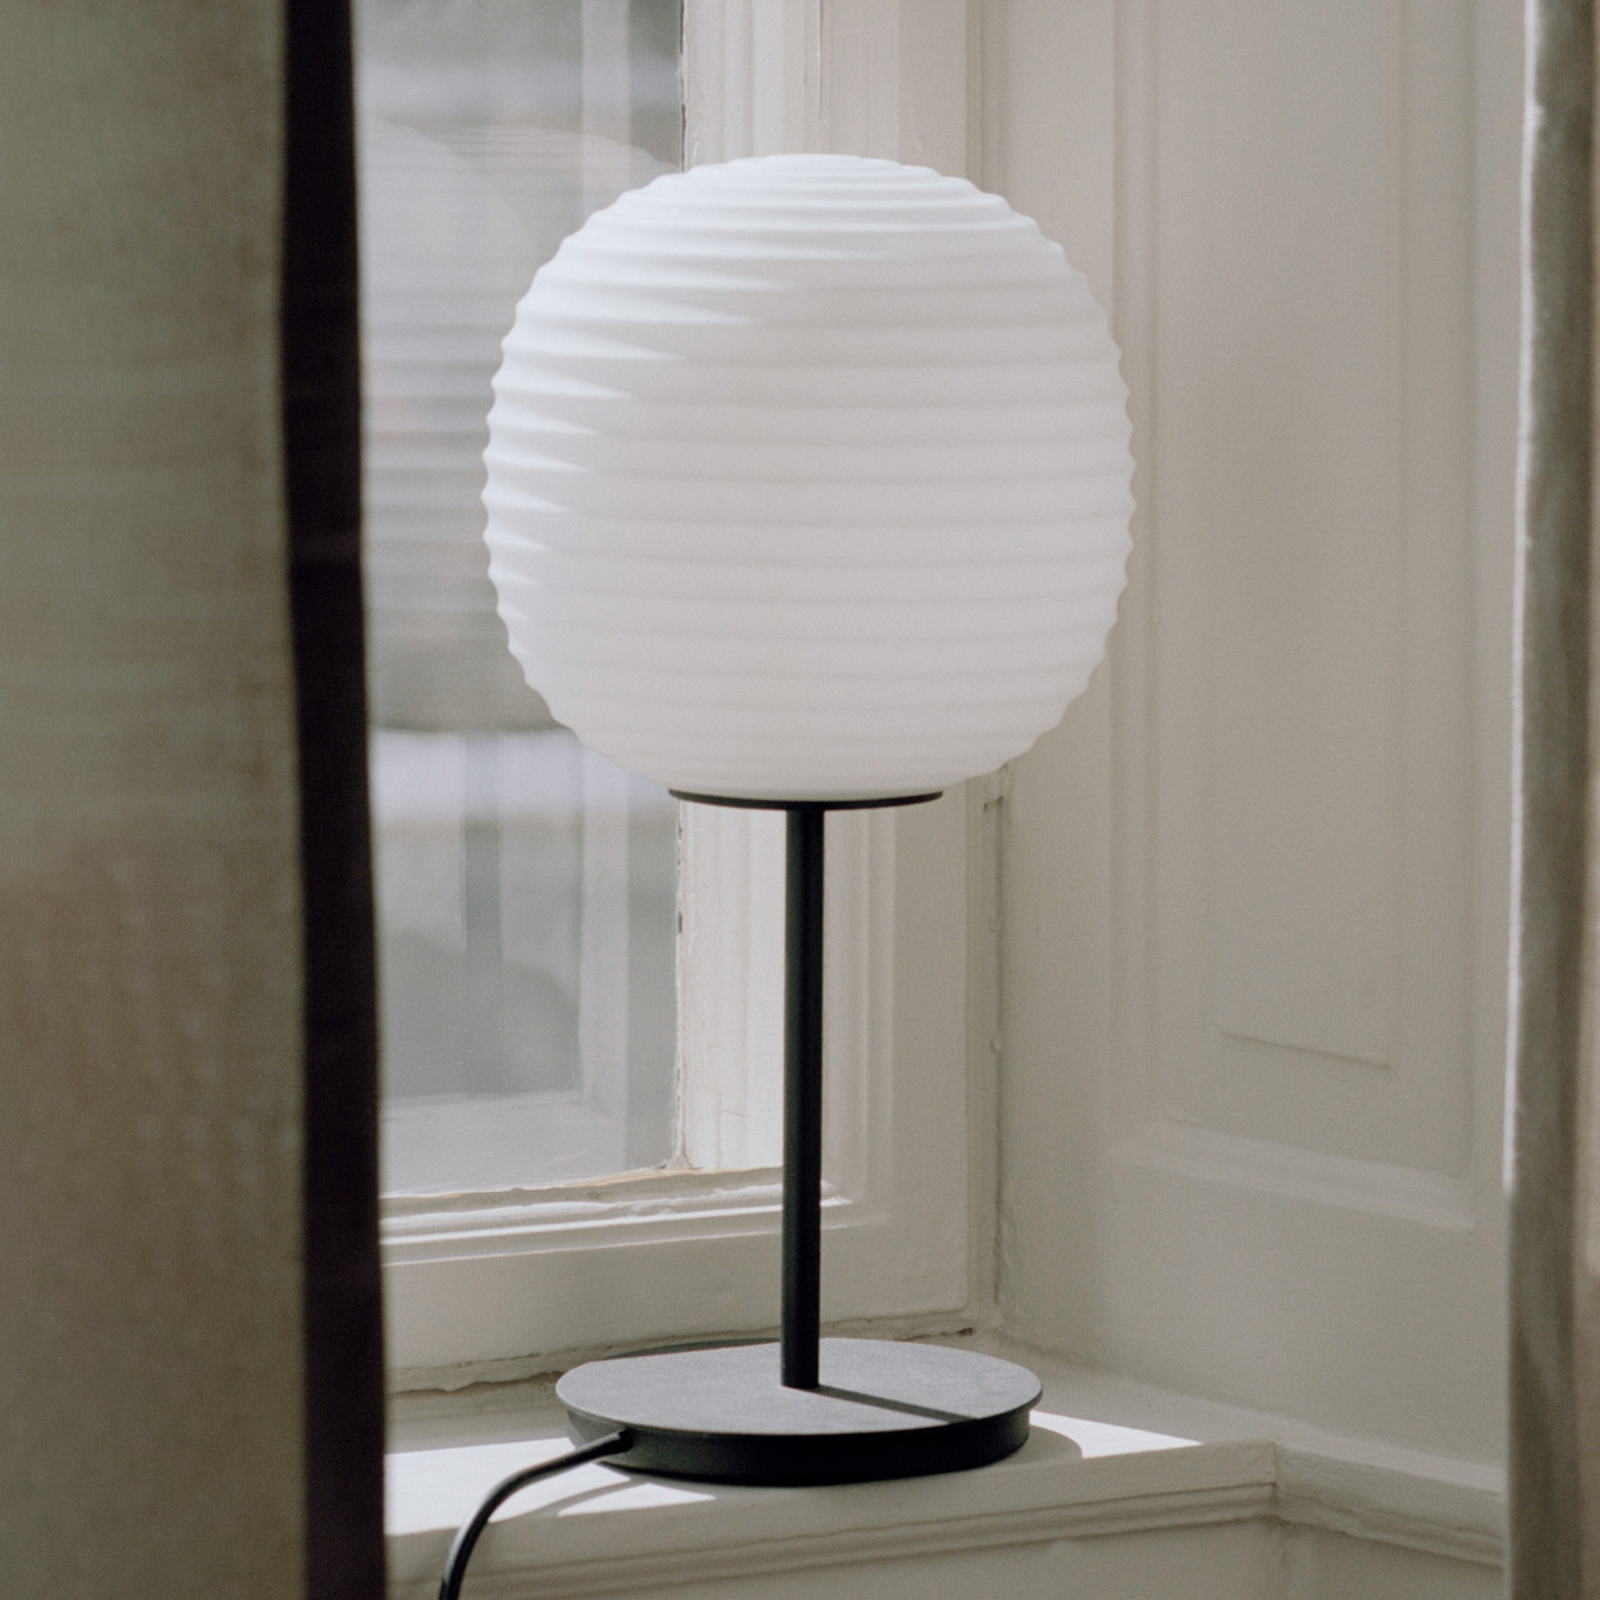 New Works Lantern Small table lamp, height 40 cm